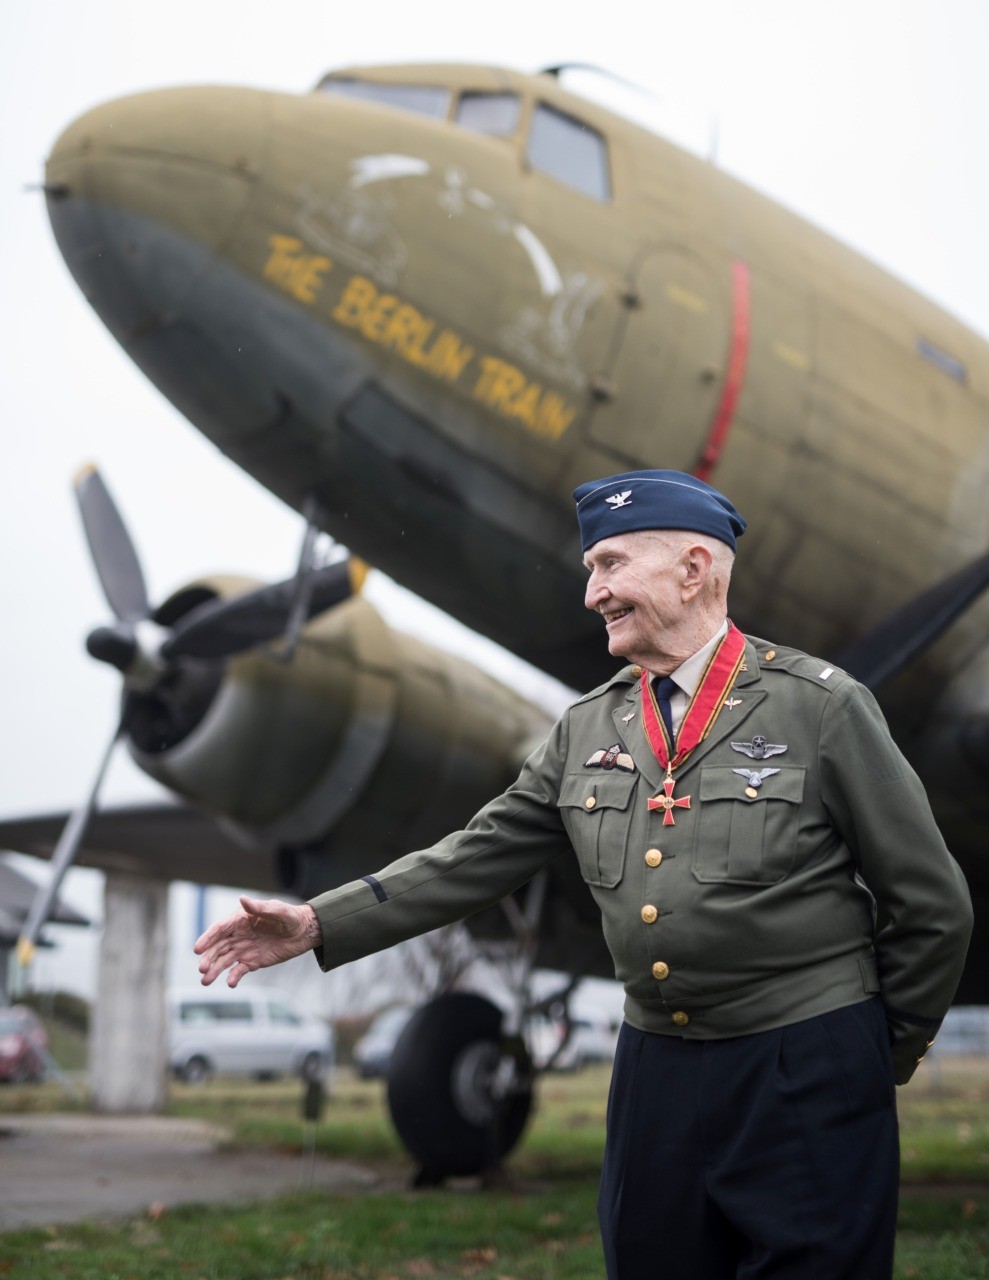 Veteran of the US Air Force and so-called "candy bombers" pilot Gail Halvorsen poses in front of a military transport aircraft at the airport in Frankfurt am Main, central Germany, on November 21, 2016. / AFP / dpa / Boris Roessler / Germany OUT (Photo credit should read BORIS ROESSLER/AFP/Getty Images)